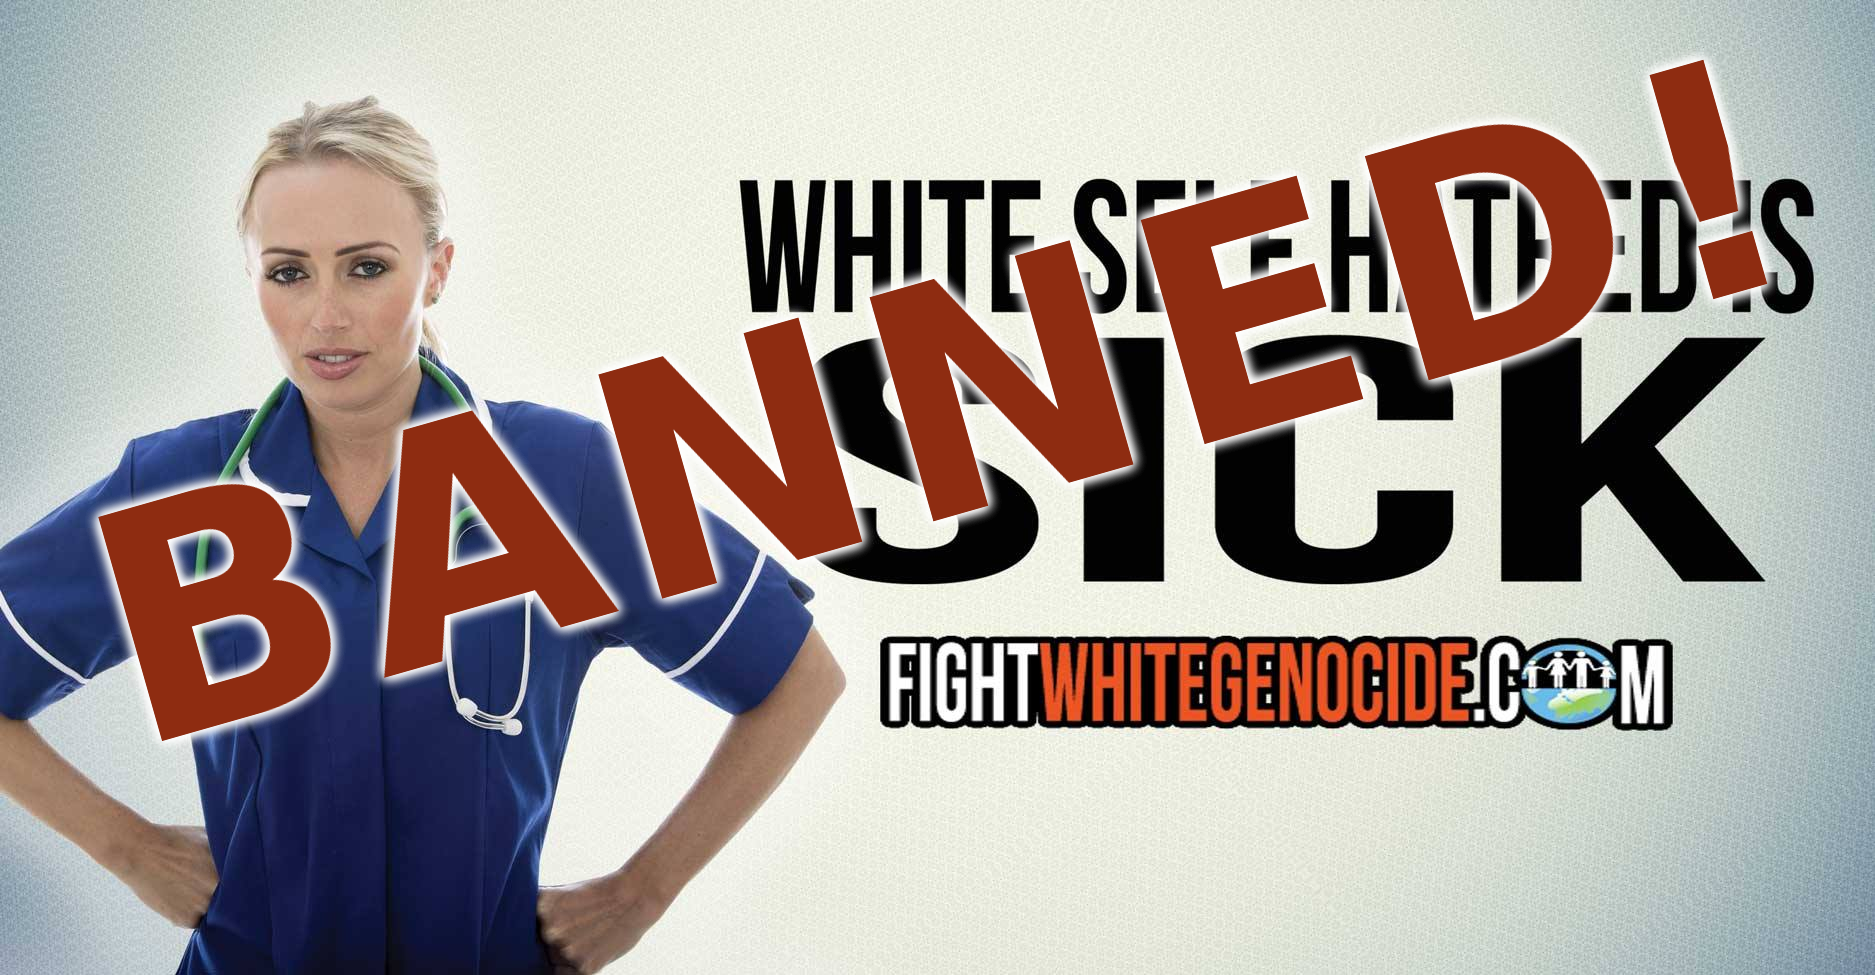 Harassment Forces FWG West Virginia Billboard Down - Fight White Genocide1875 x 975